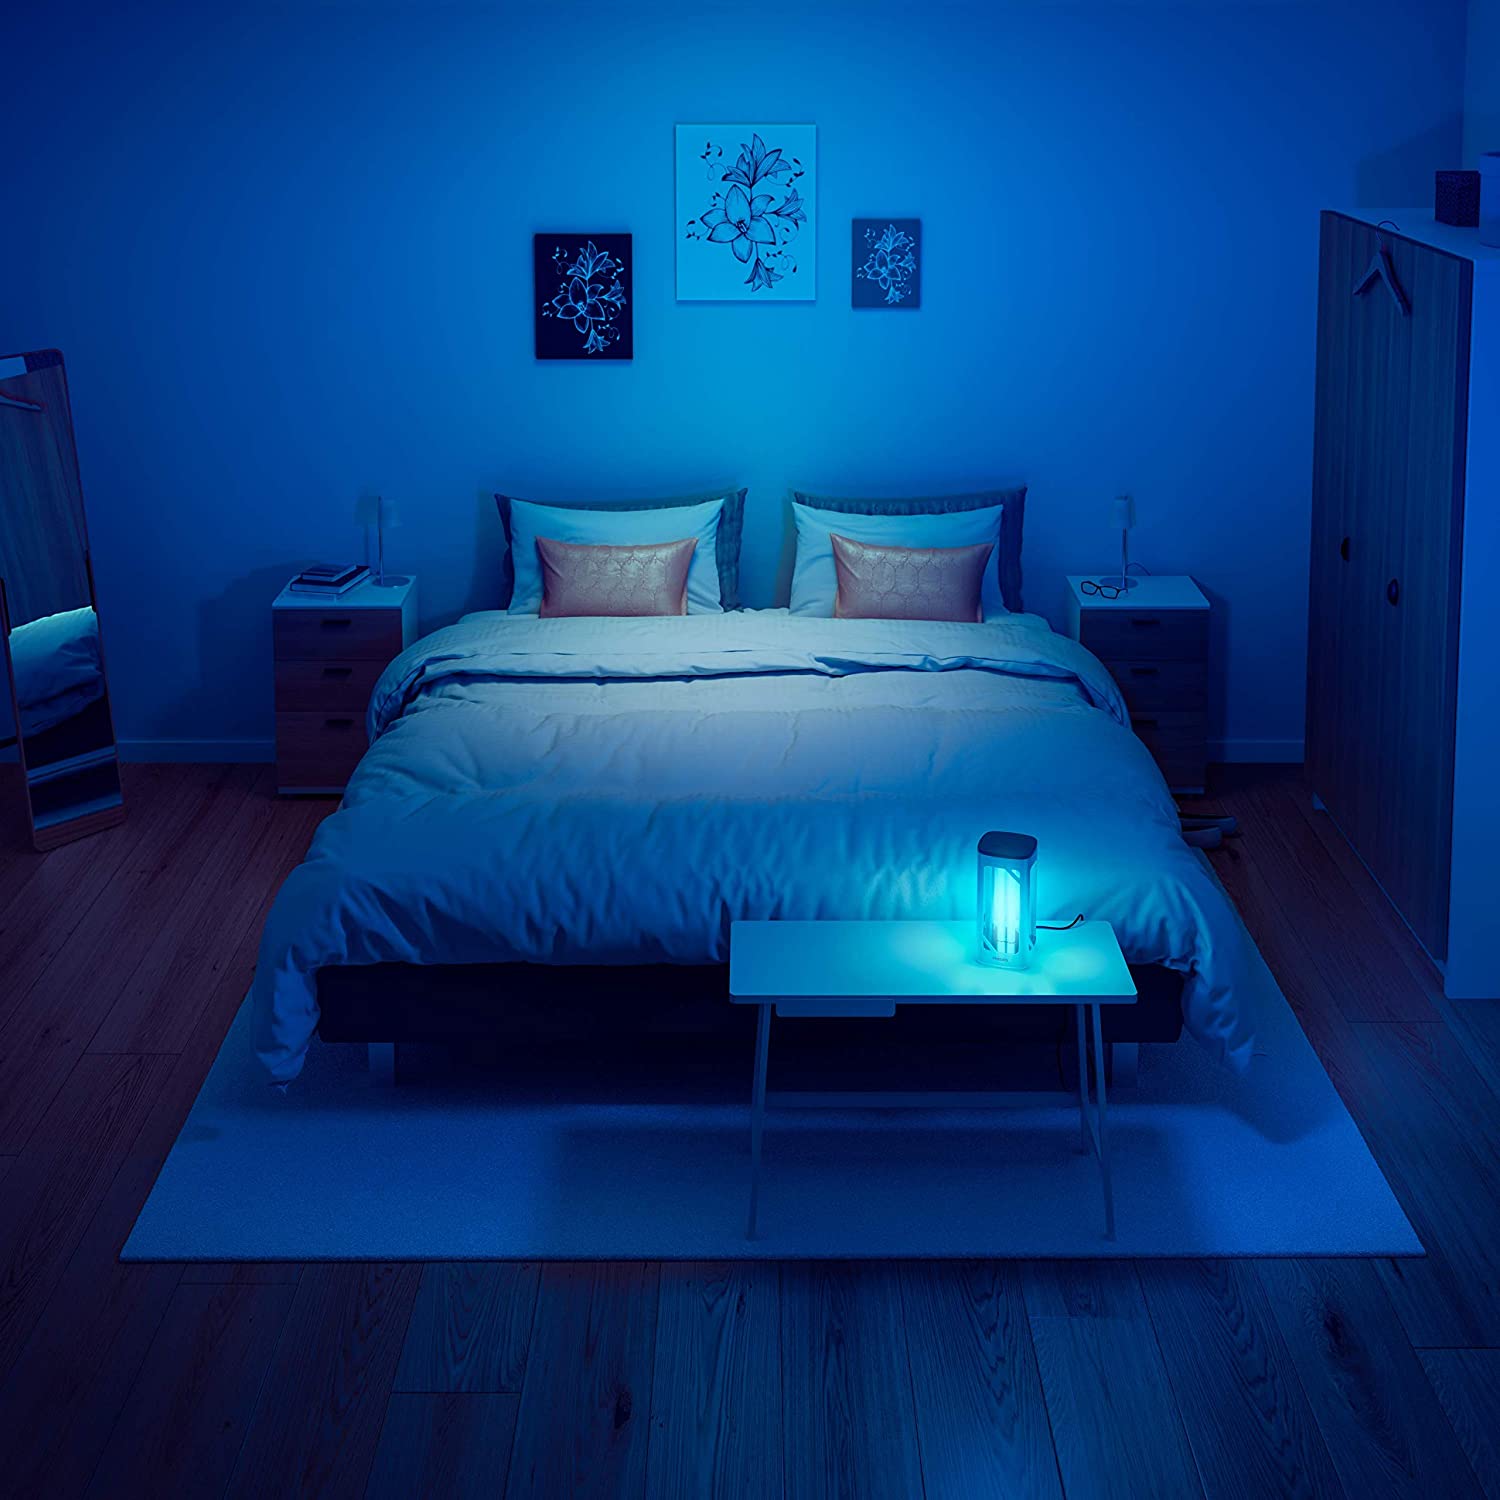 UV lamp fights fungi, viruses and bacteria in the home